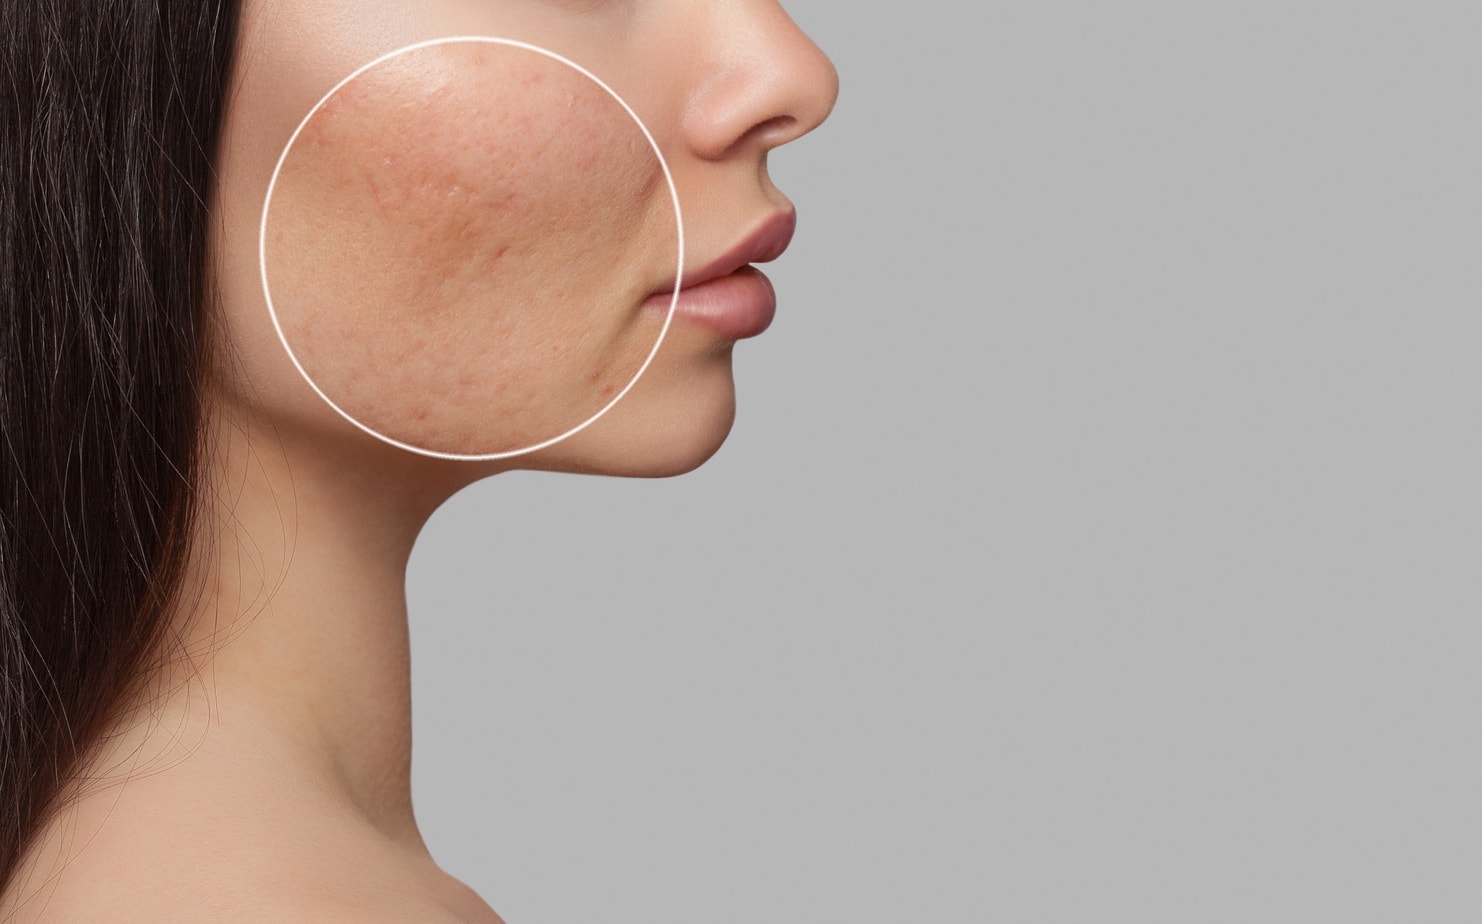 How can acne scars be treated?